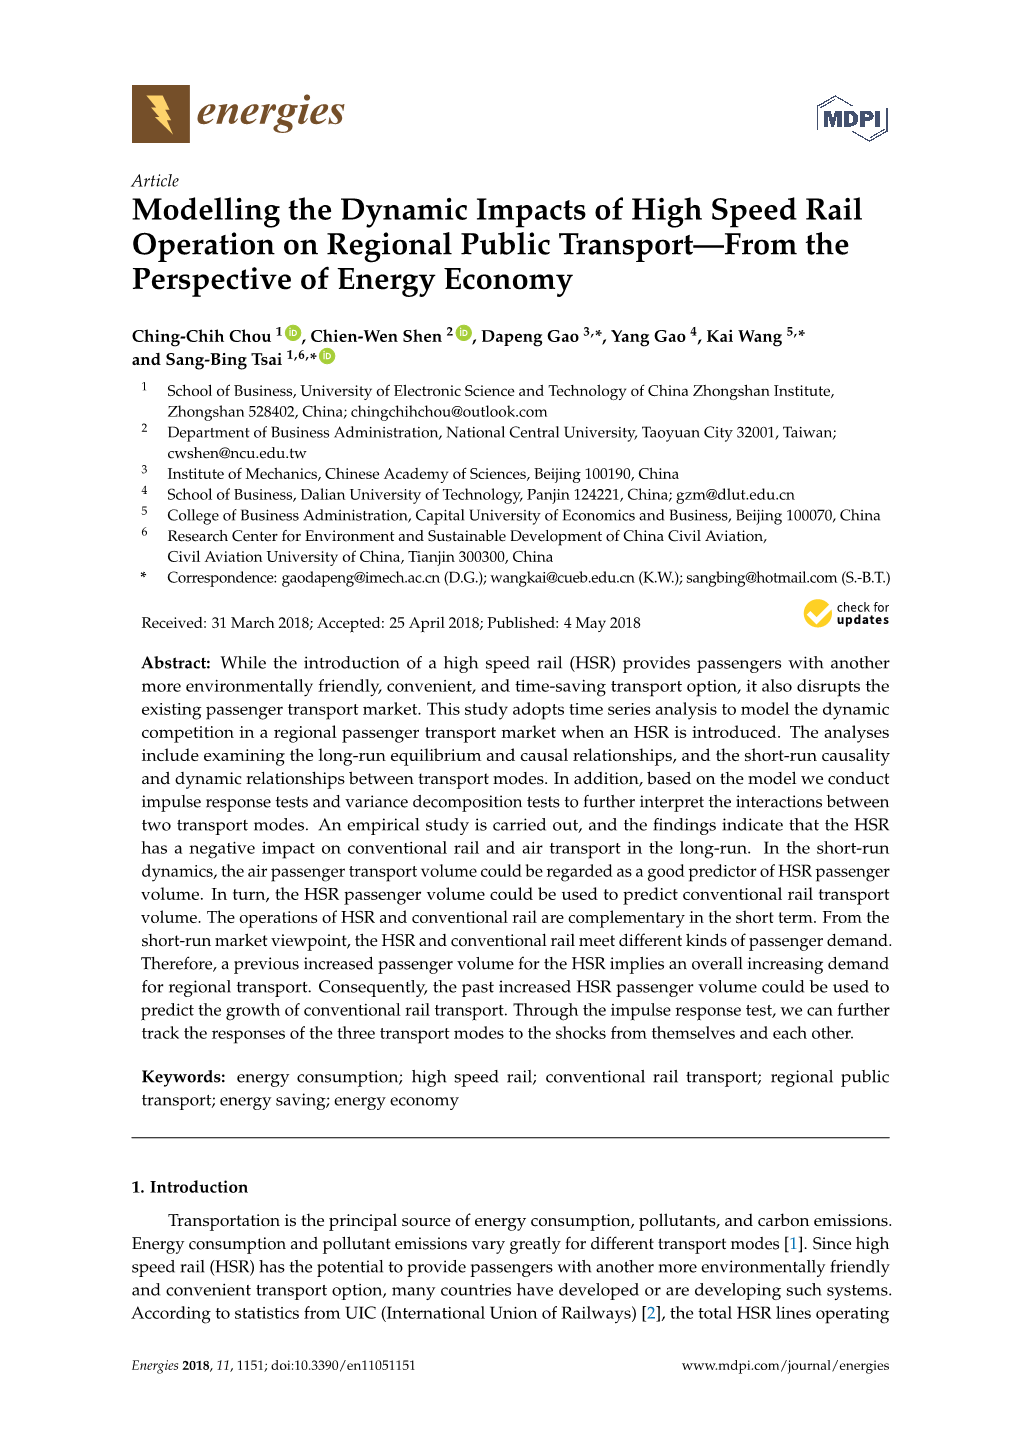 Modelling the Dynamic Impacts of High Speed Rail Operation on Regional Public Transport—From the Perspective of Energy Economy